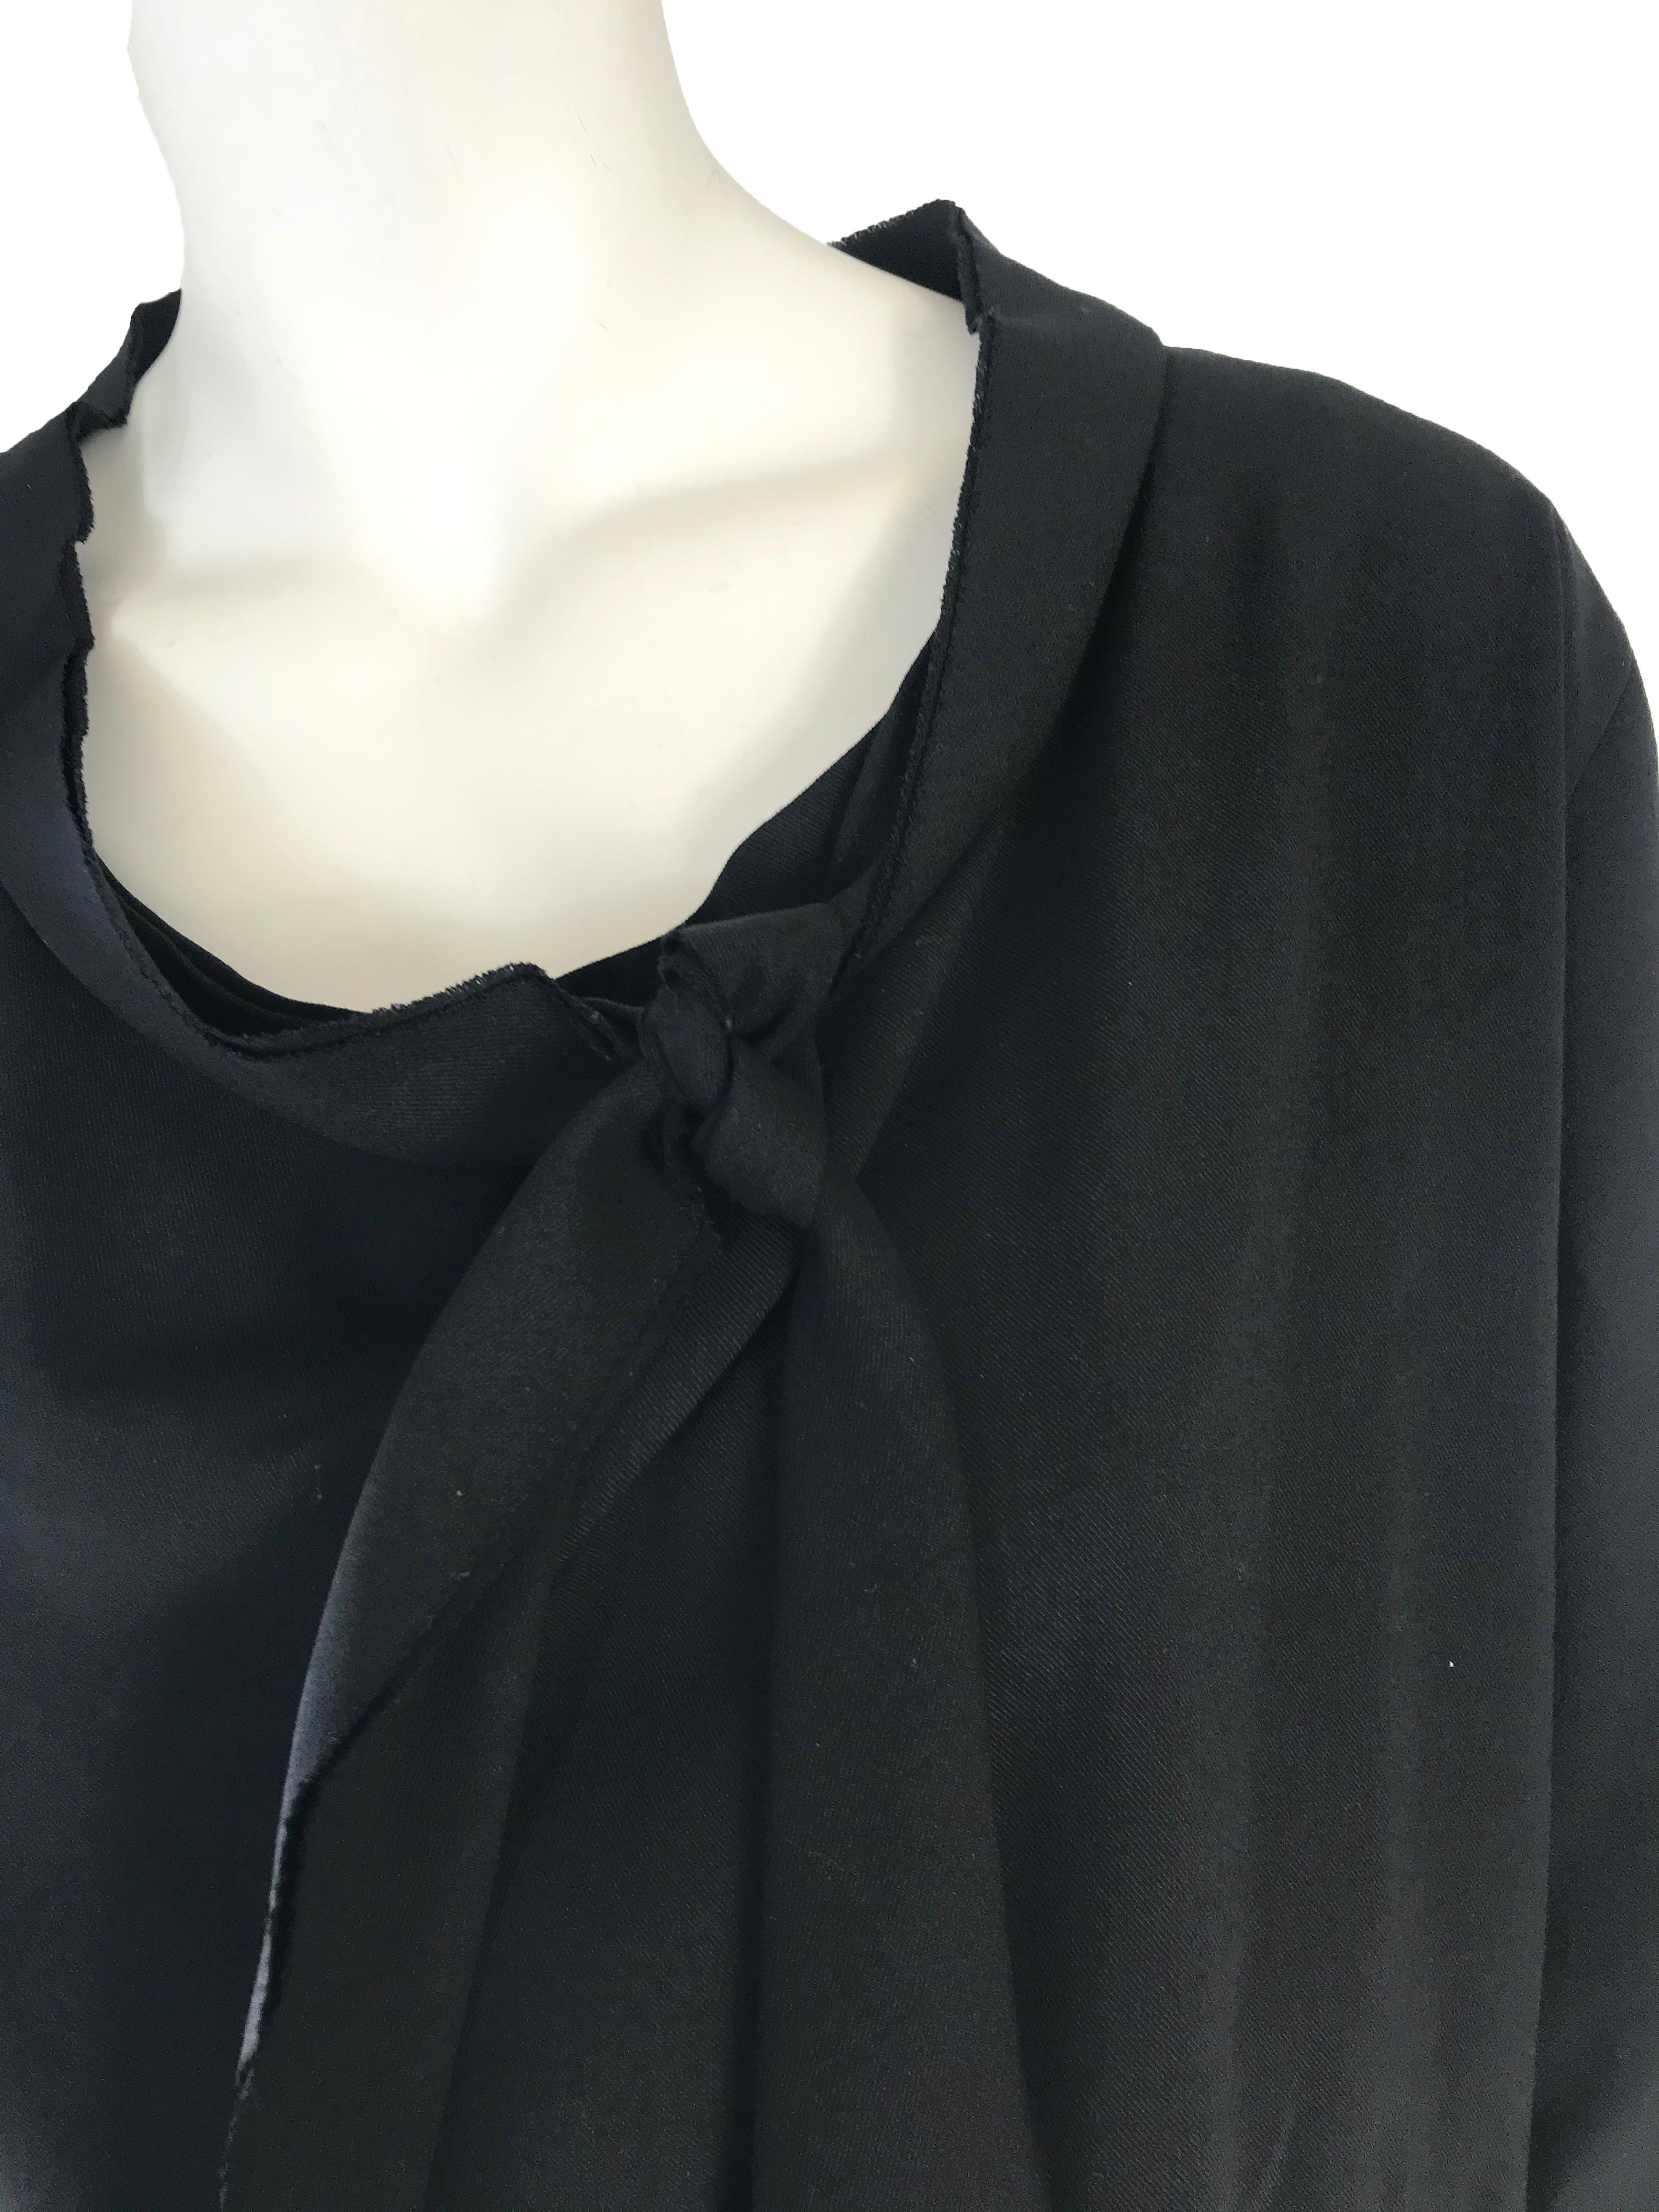 1990s Yohji Yamamoto tie neck top.

Condition: Excellent.
100% wool
Size Small